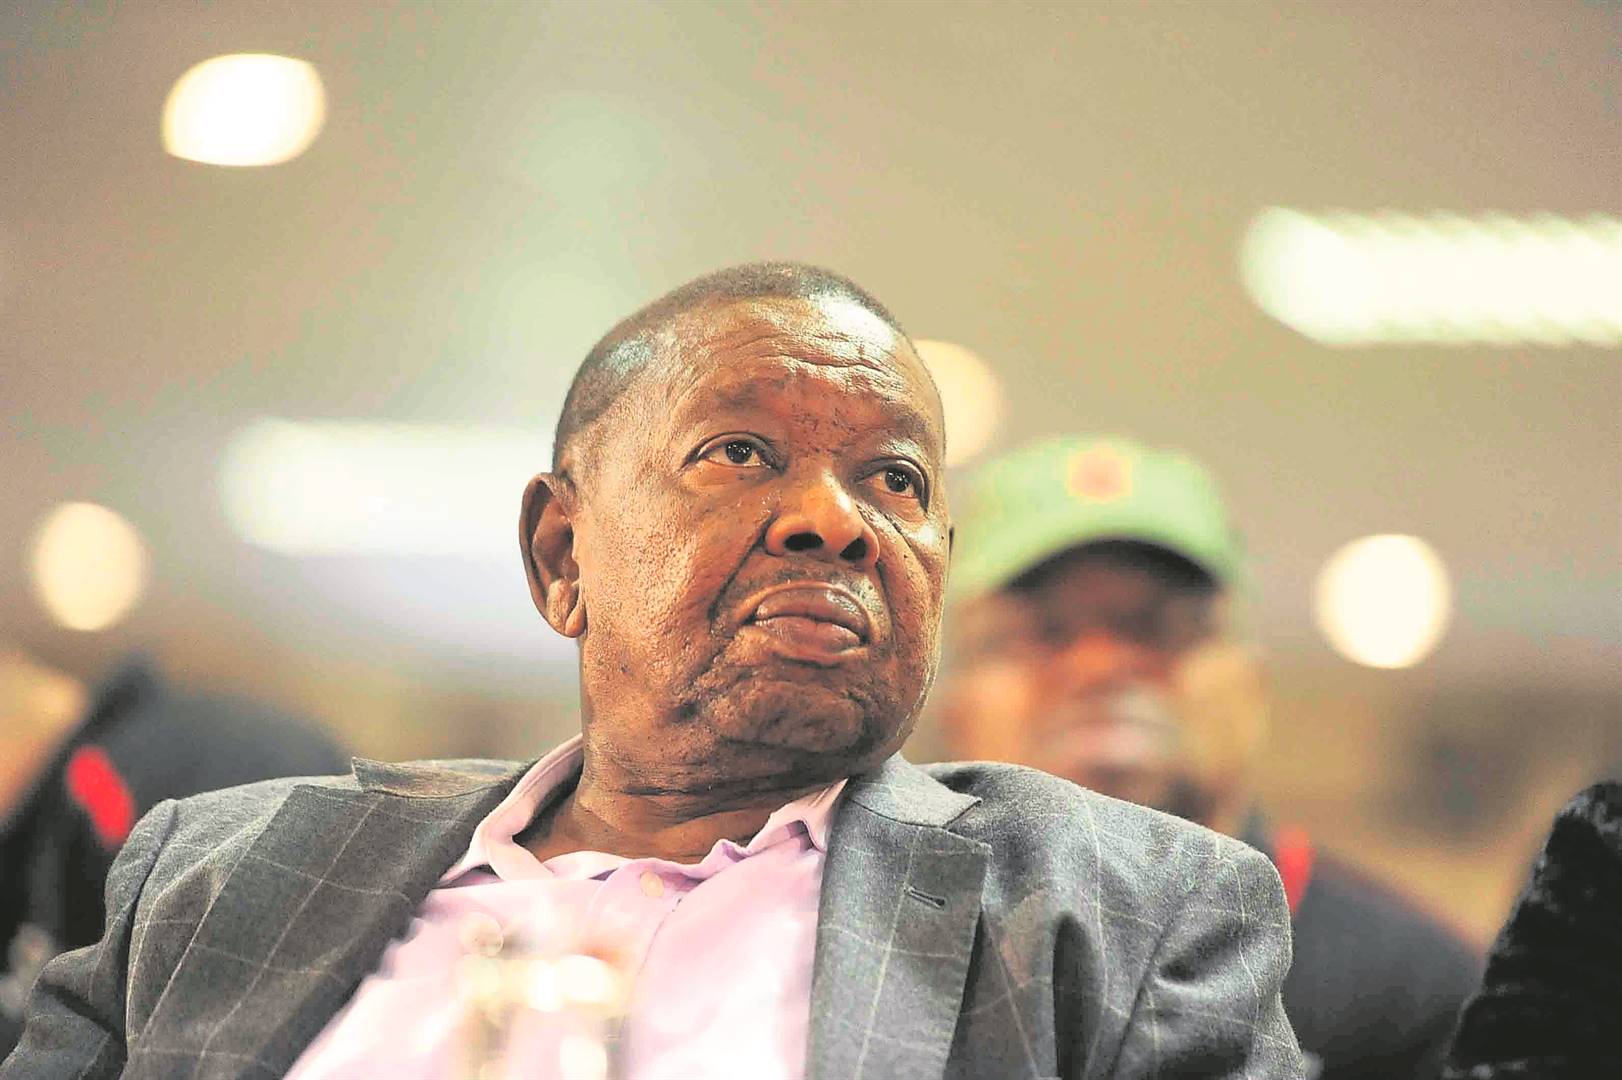 Higher Education Minister Blade Nzimande says there is a NSFAS shortfall due to Covid-19 and budget cuts. Picture: Gallo Images/ Sowetan/Thulani Mbele